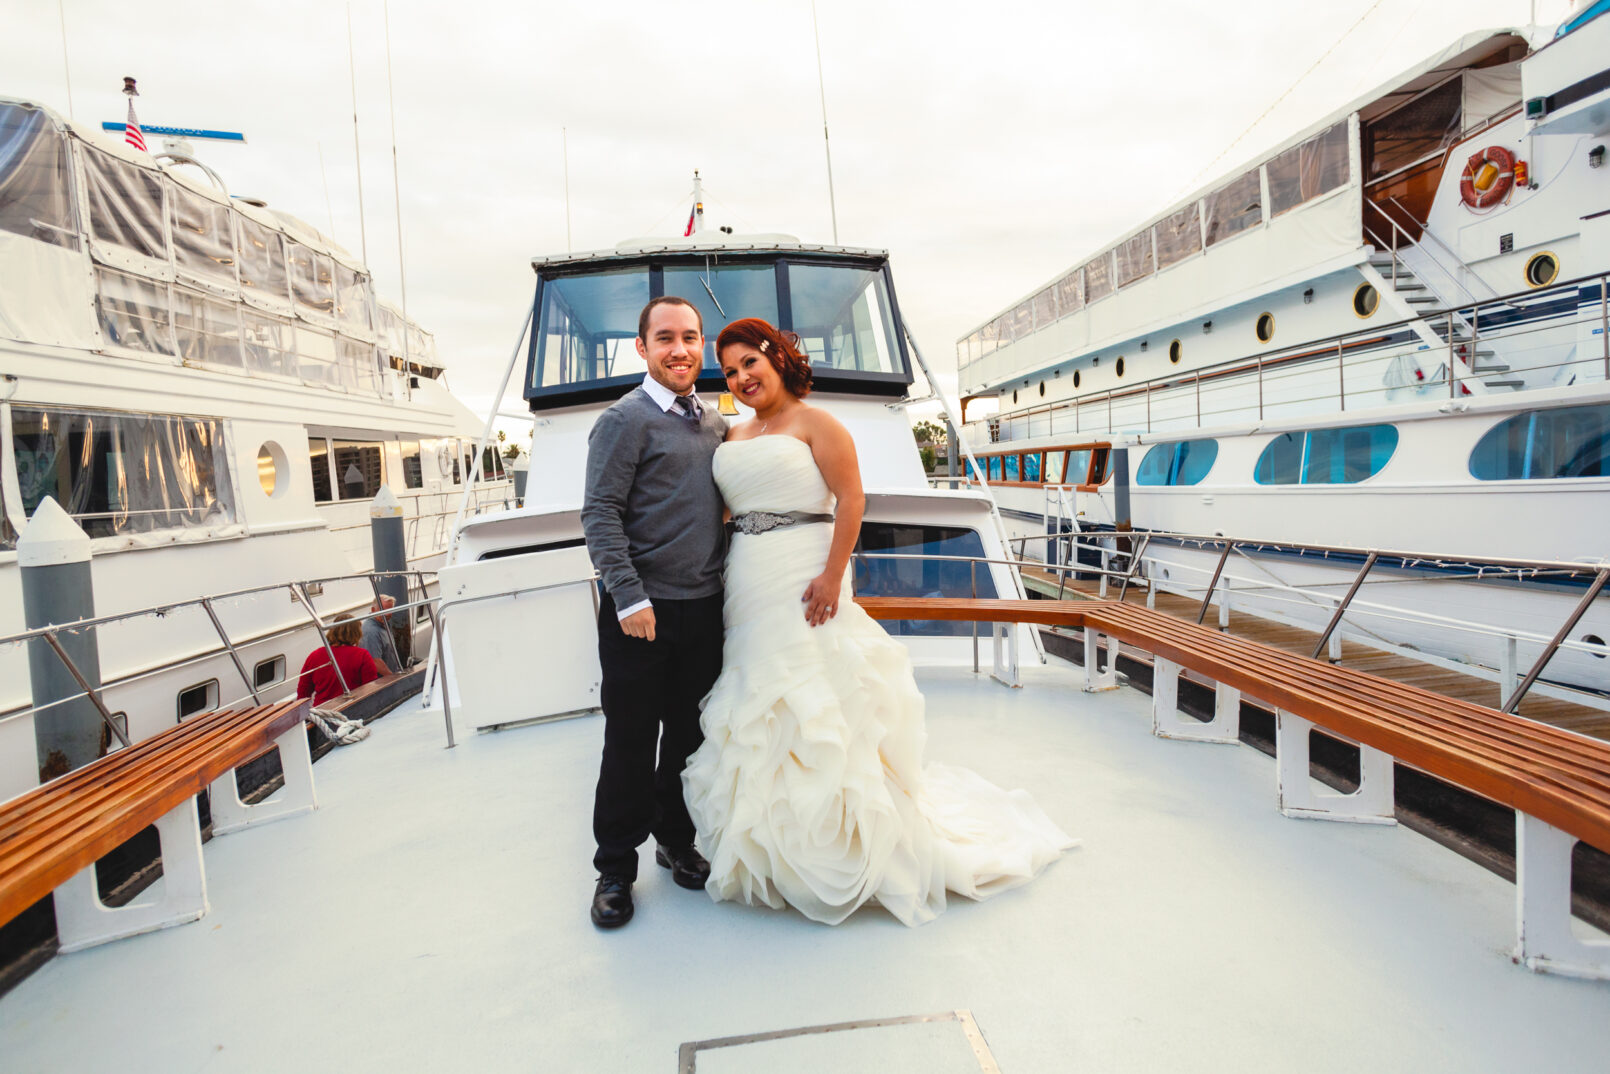 Bride & groom posing for a photo on the Hornblower Cruises